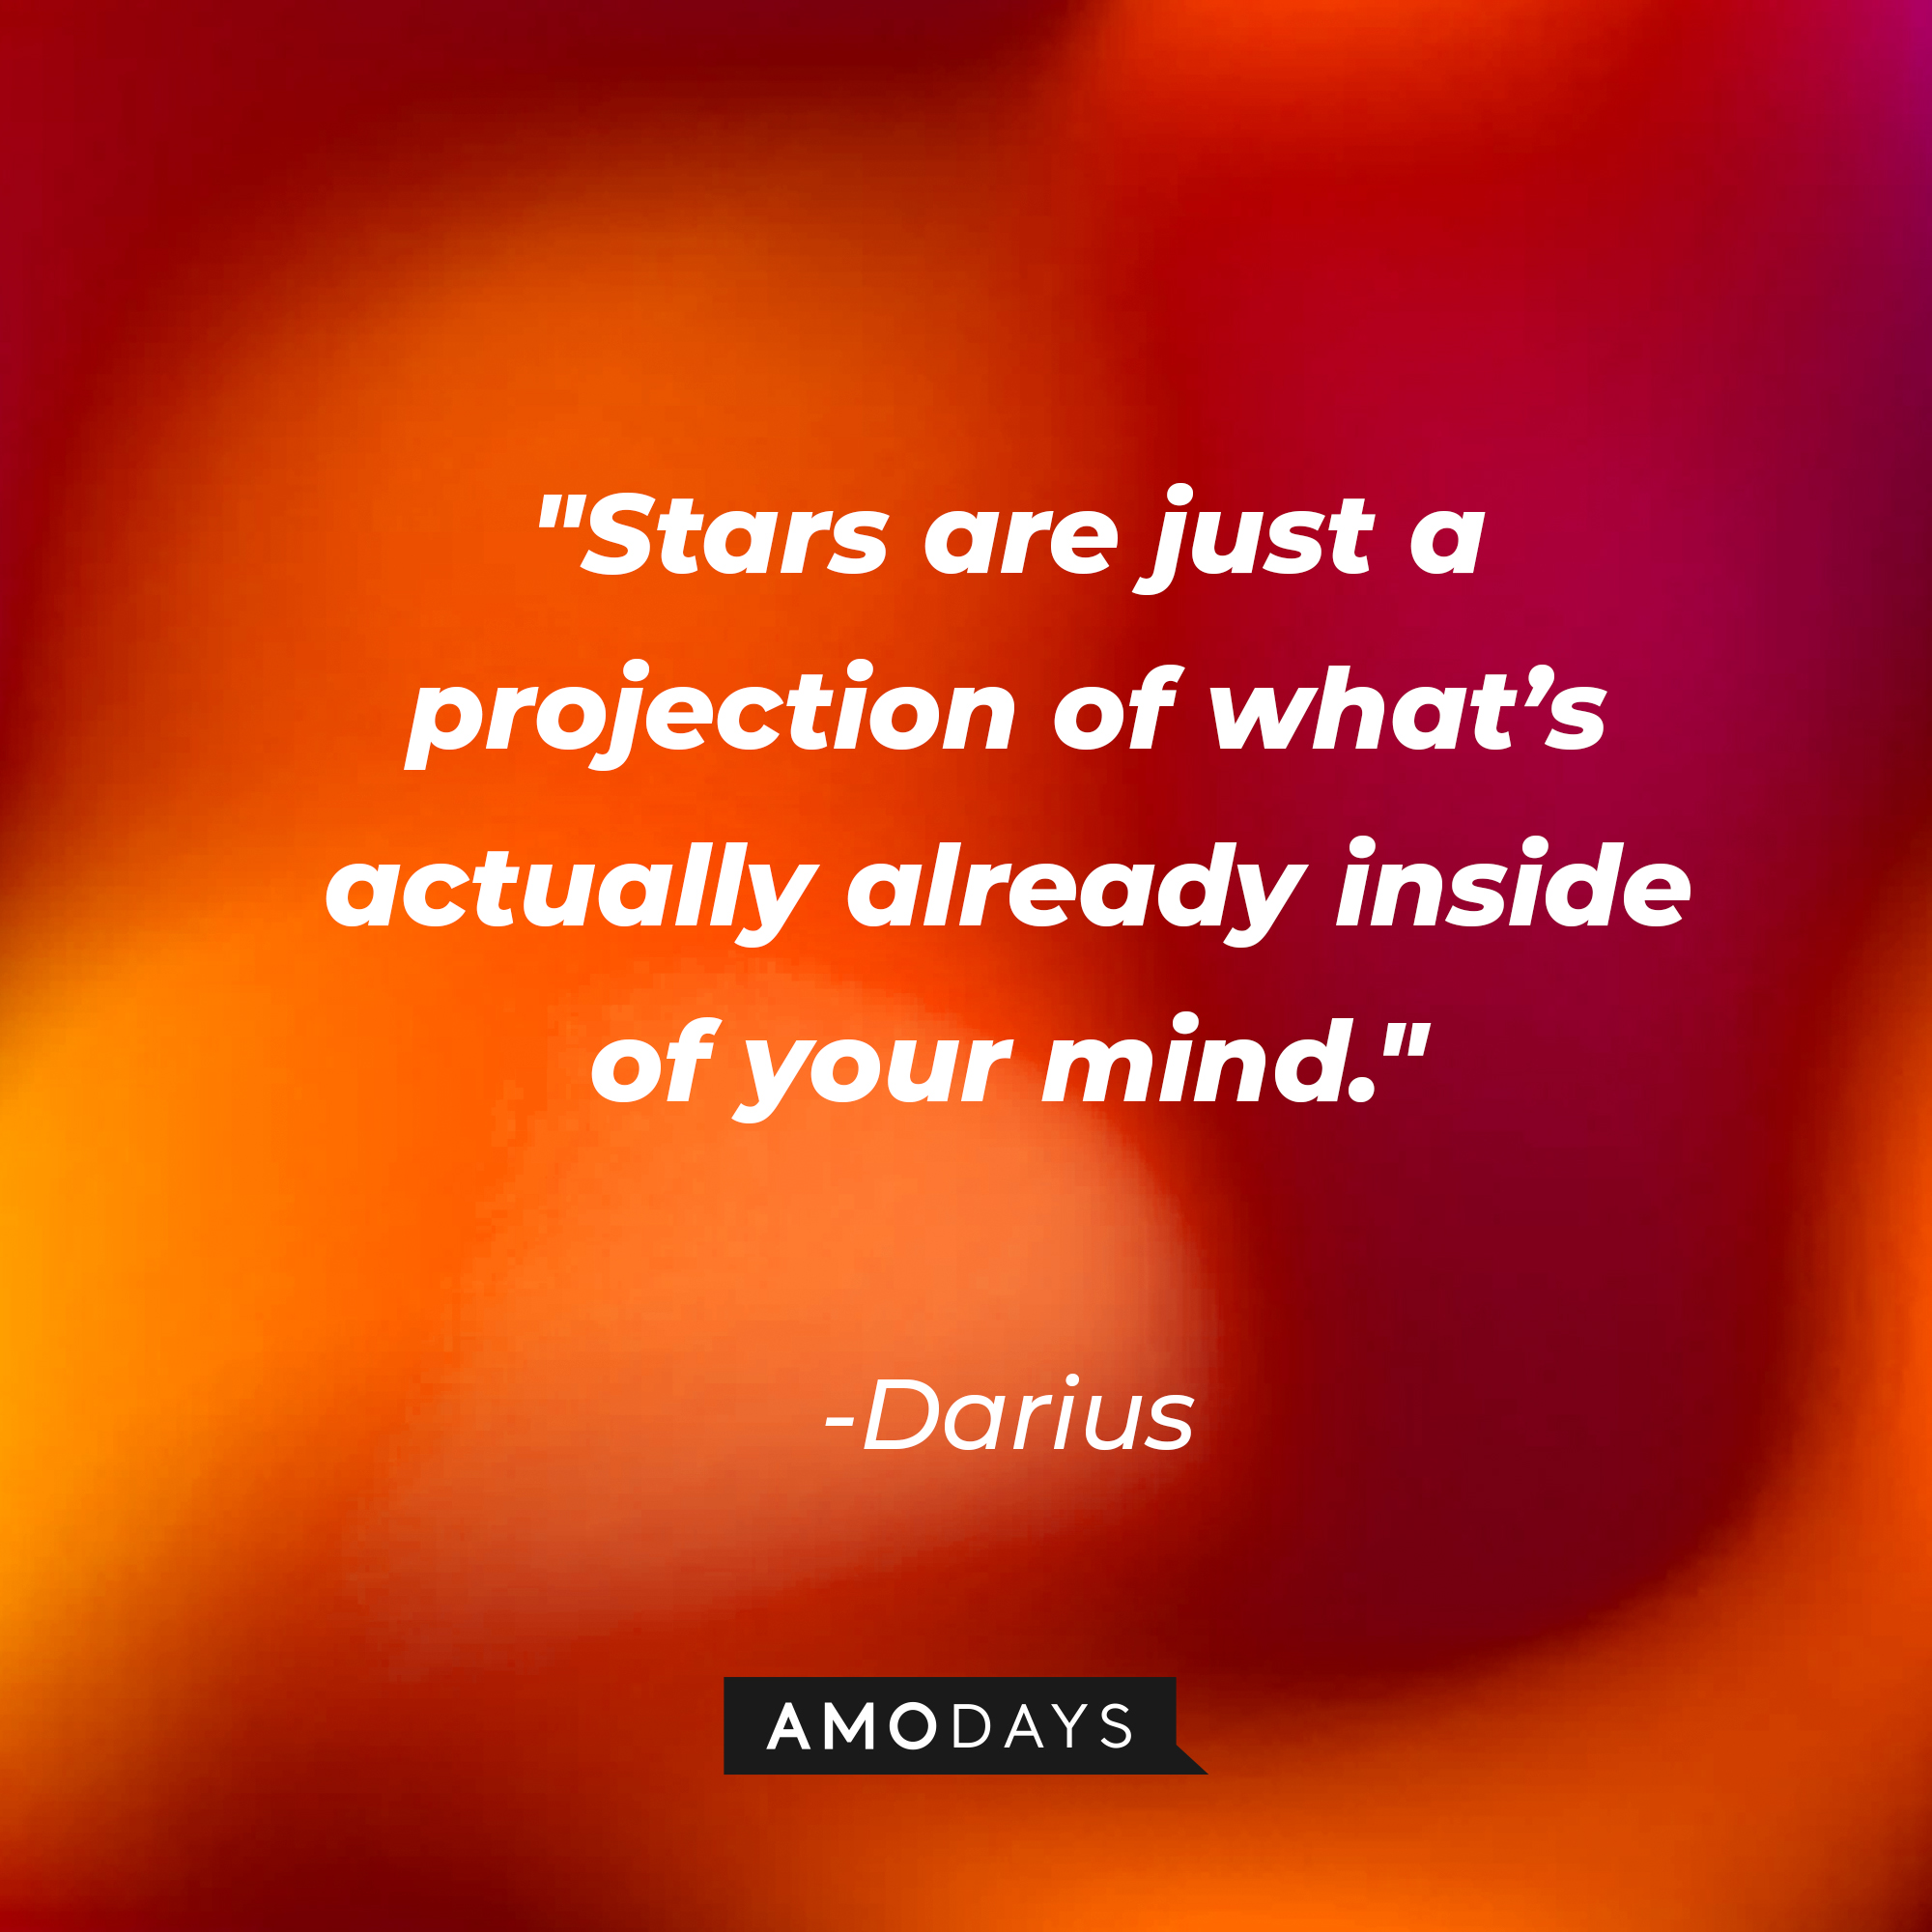 Darius’ quote: "Stars are just a projection of what’s actually already inside of your mind." | Source: AmoDays